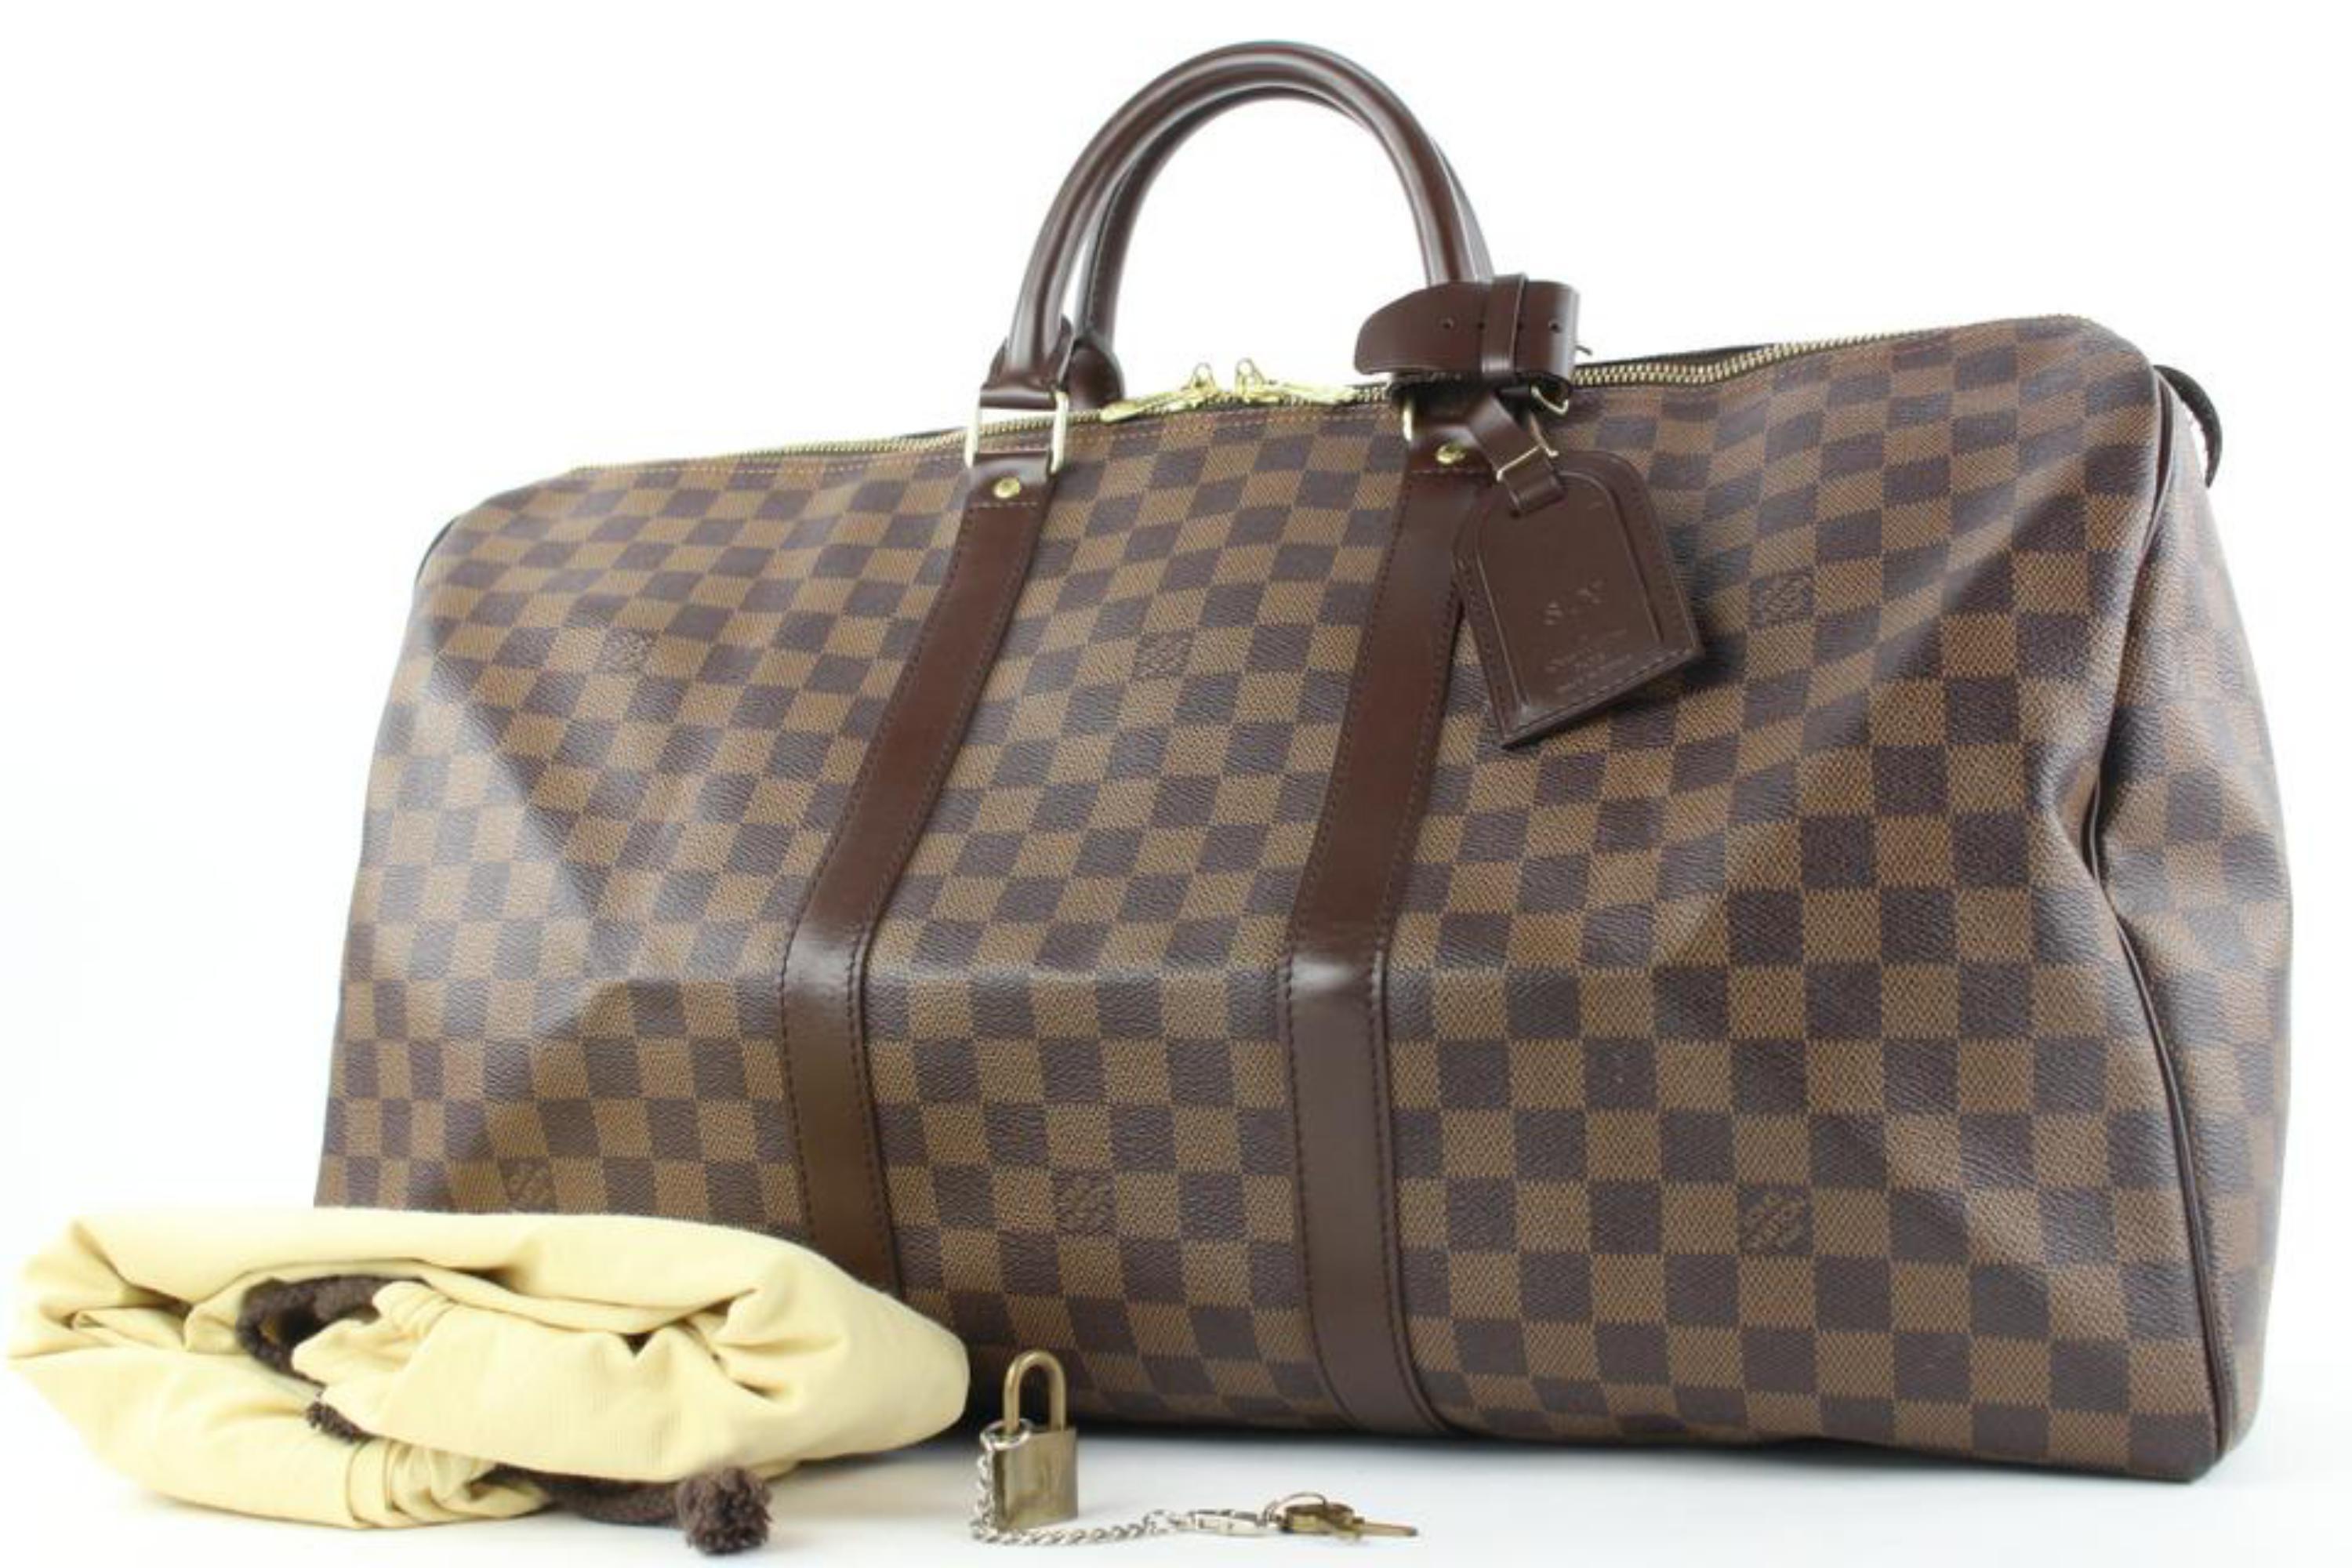 Louis Vuitton Damier Ebene Keepall 50 Duffle bag 4lv1123
Date Code/Serial Number: MB0066
Made In: France
Measurements: Length:  20